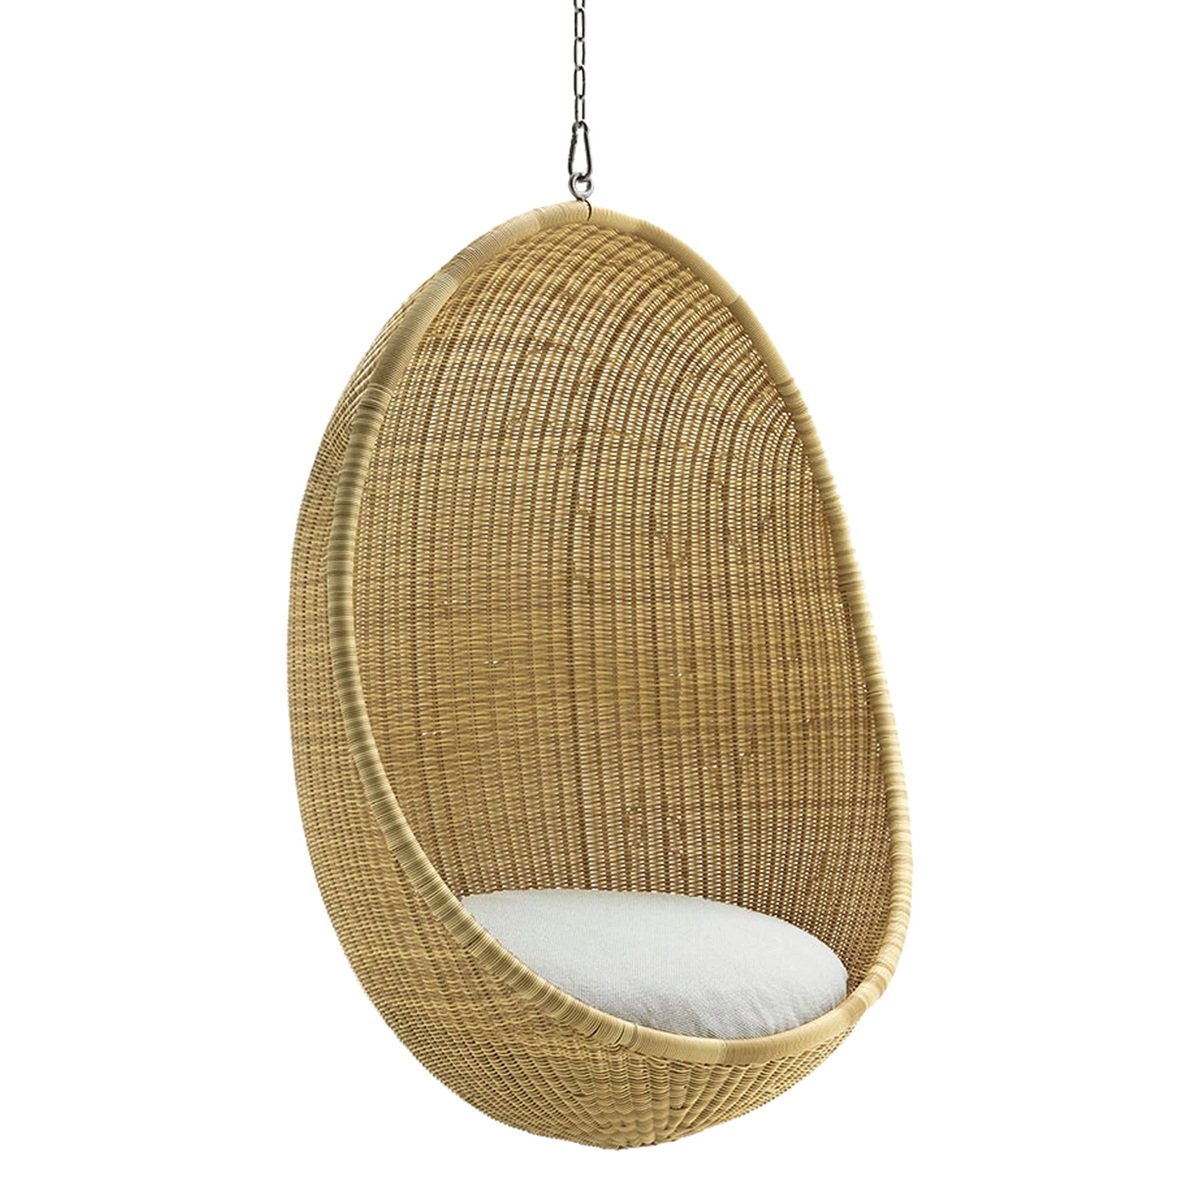 Sika Design Hanging Egg Exterior Chair, How Much Does A Hanging Egg Chair Cost In Taiwan